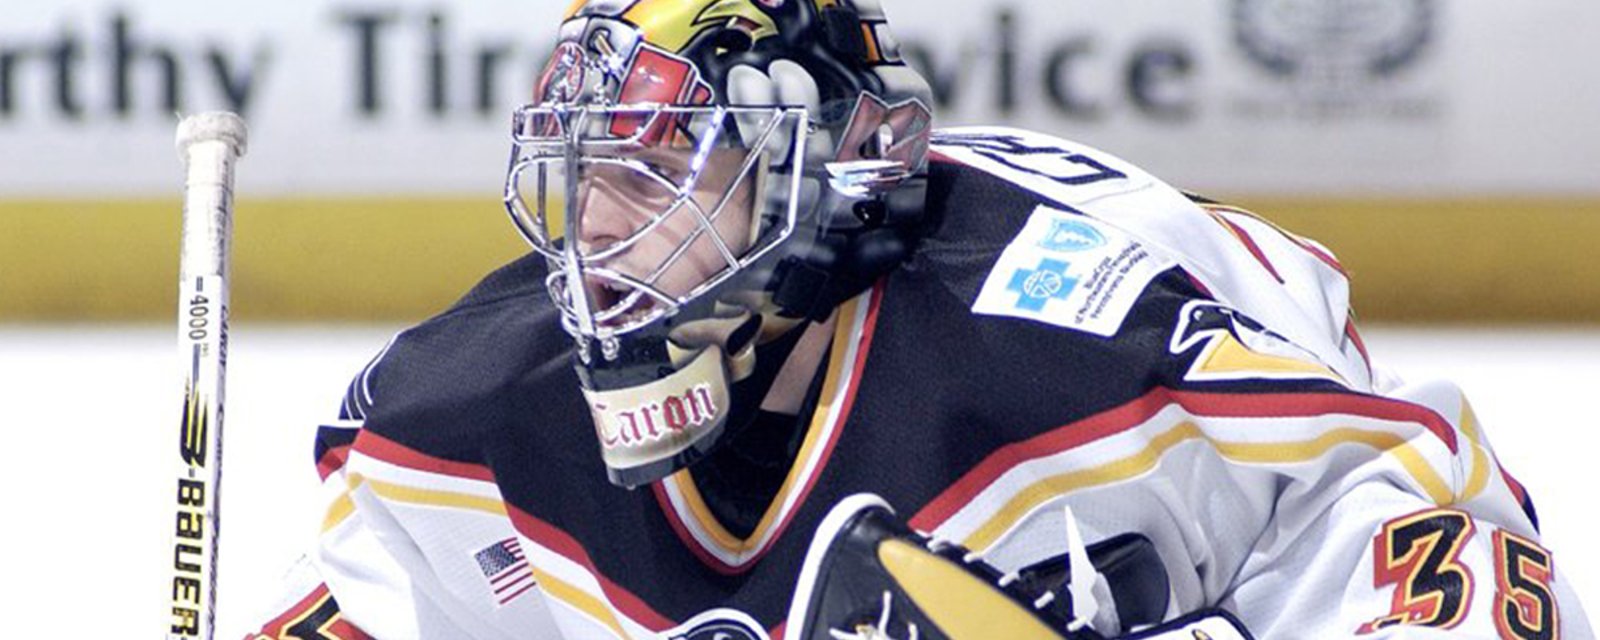 Transaction: Penguins AHL affiliate signs goalie to emergency PTO contract